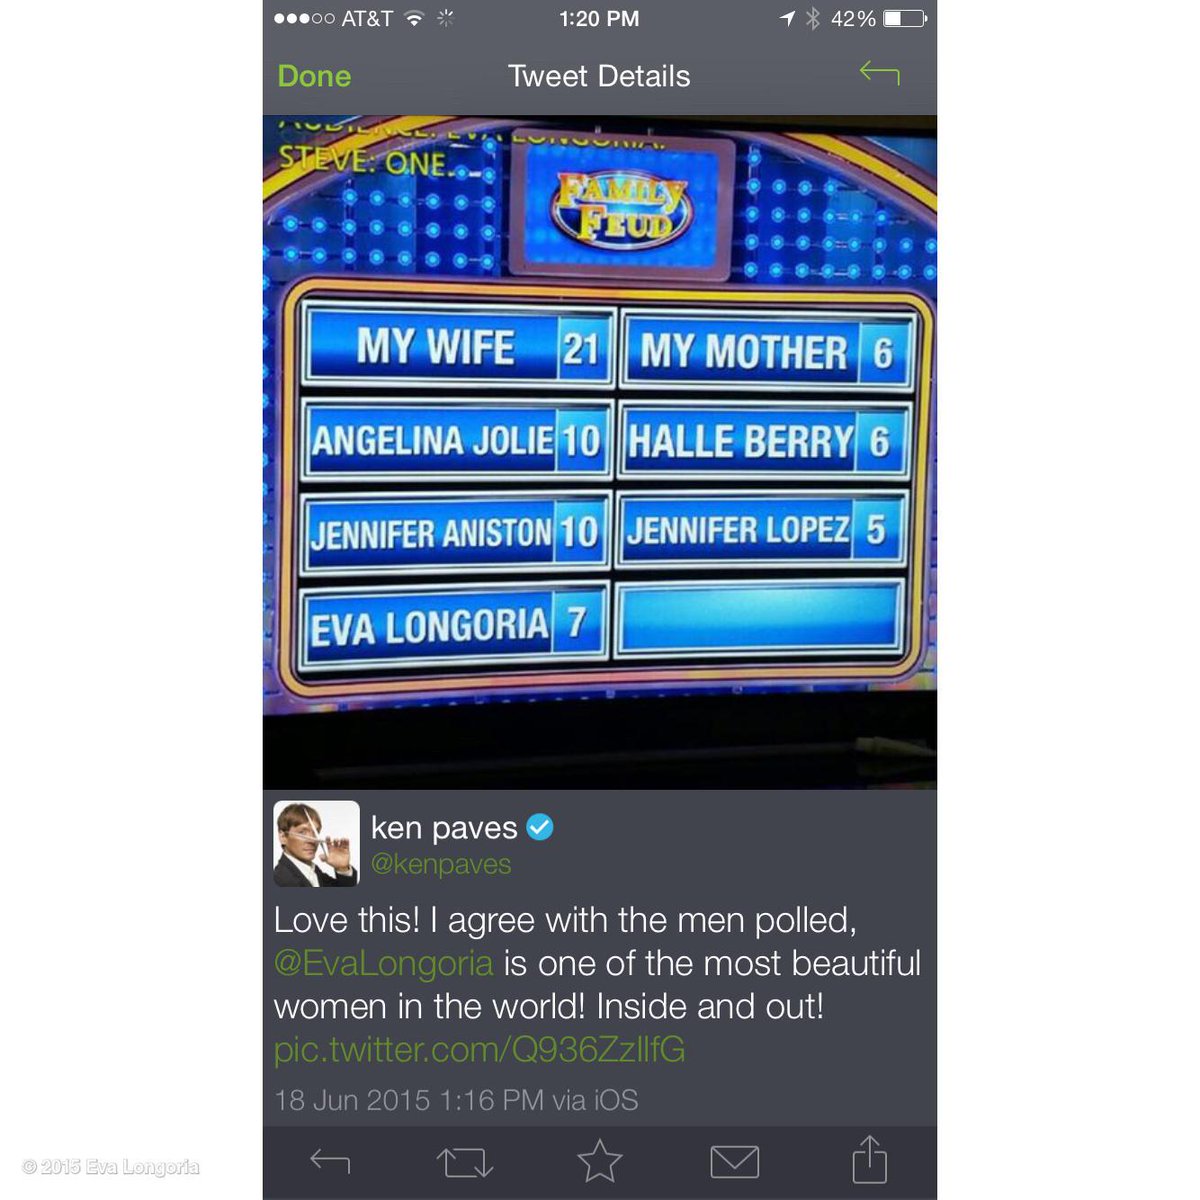 Haha love this @kenpaves and Thank u @FamilyFeud! #MomWouldBeProud http://t.co/HUGn7N4bgw